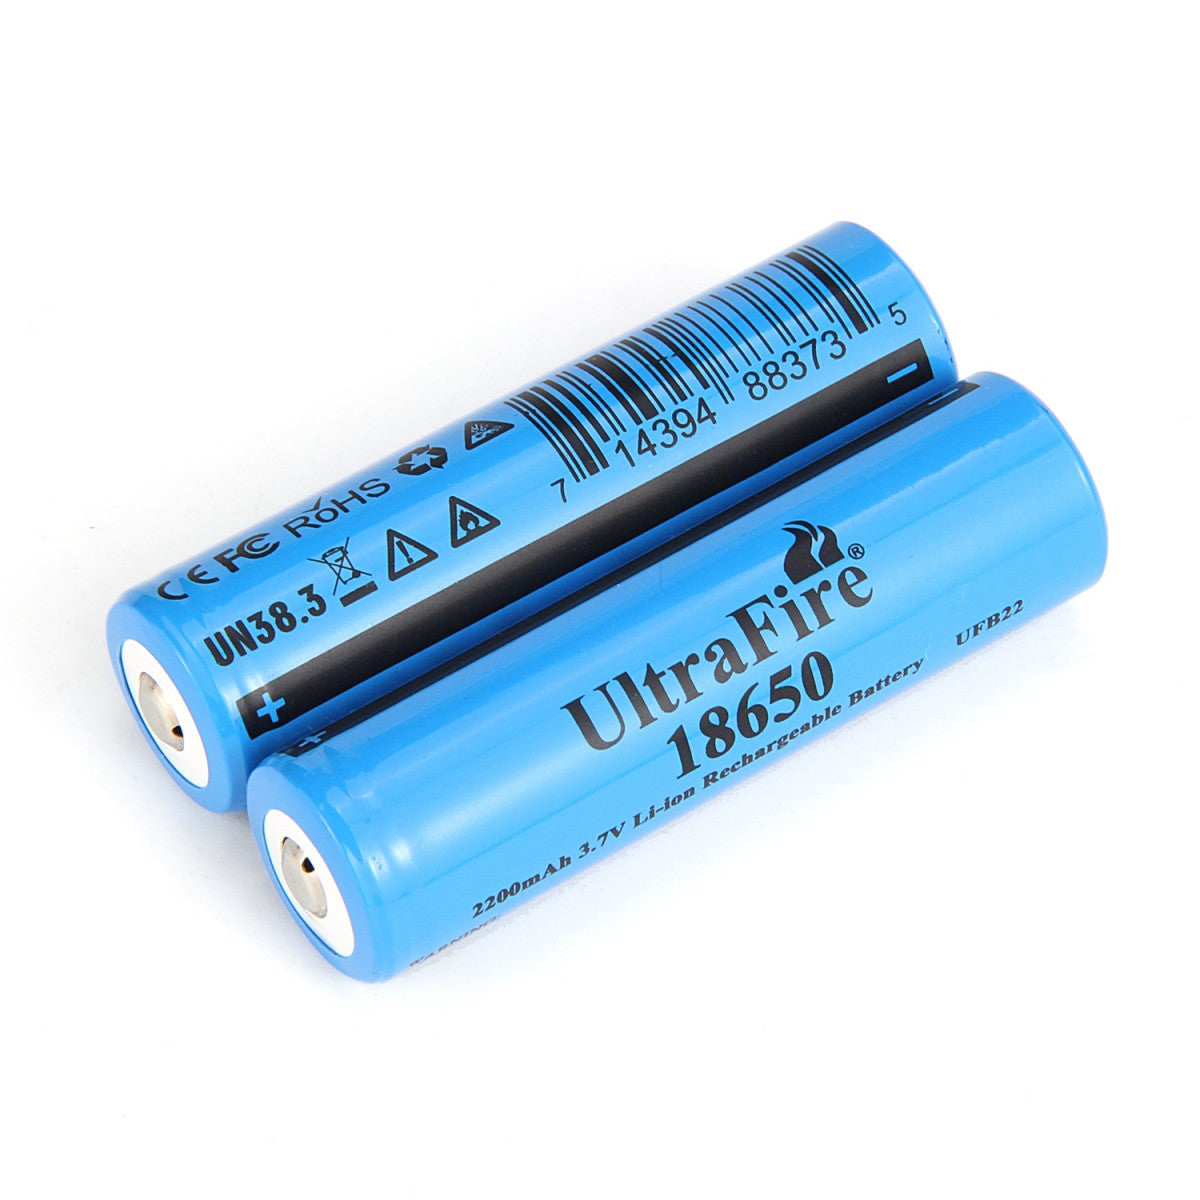 Orthodox Vaak gesproken Tijdens ~ UltraFire 2200mAh 3.7V 18650 Rechargeable Li-ion Battery Without Prote